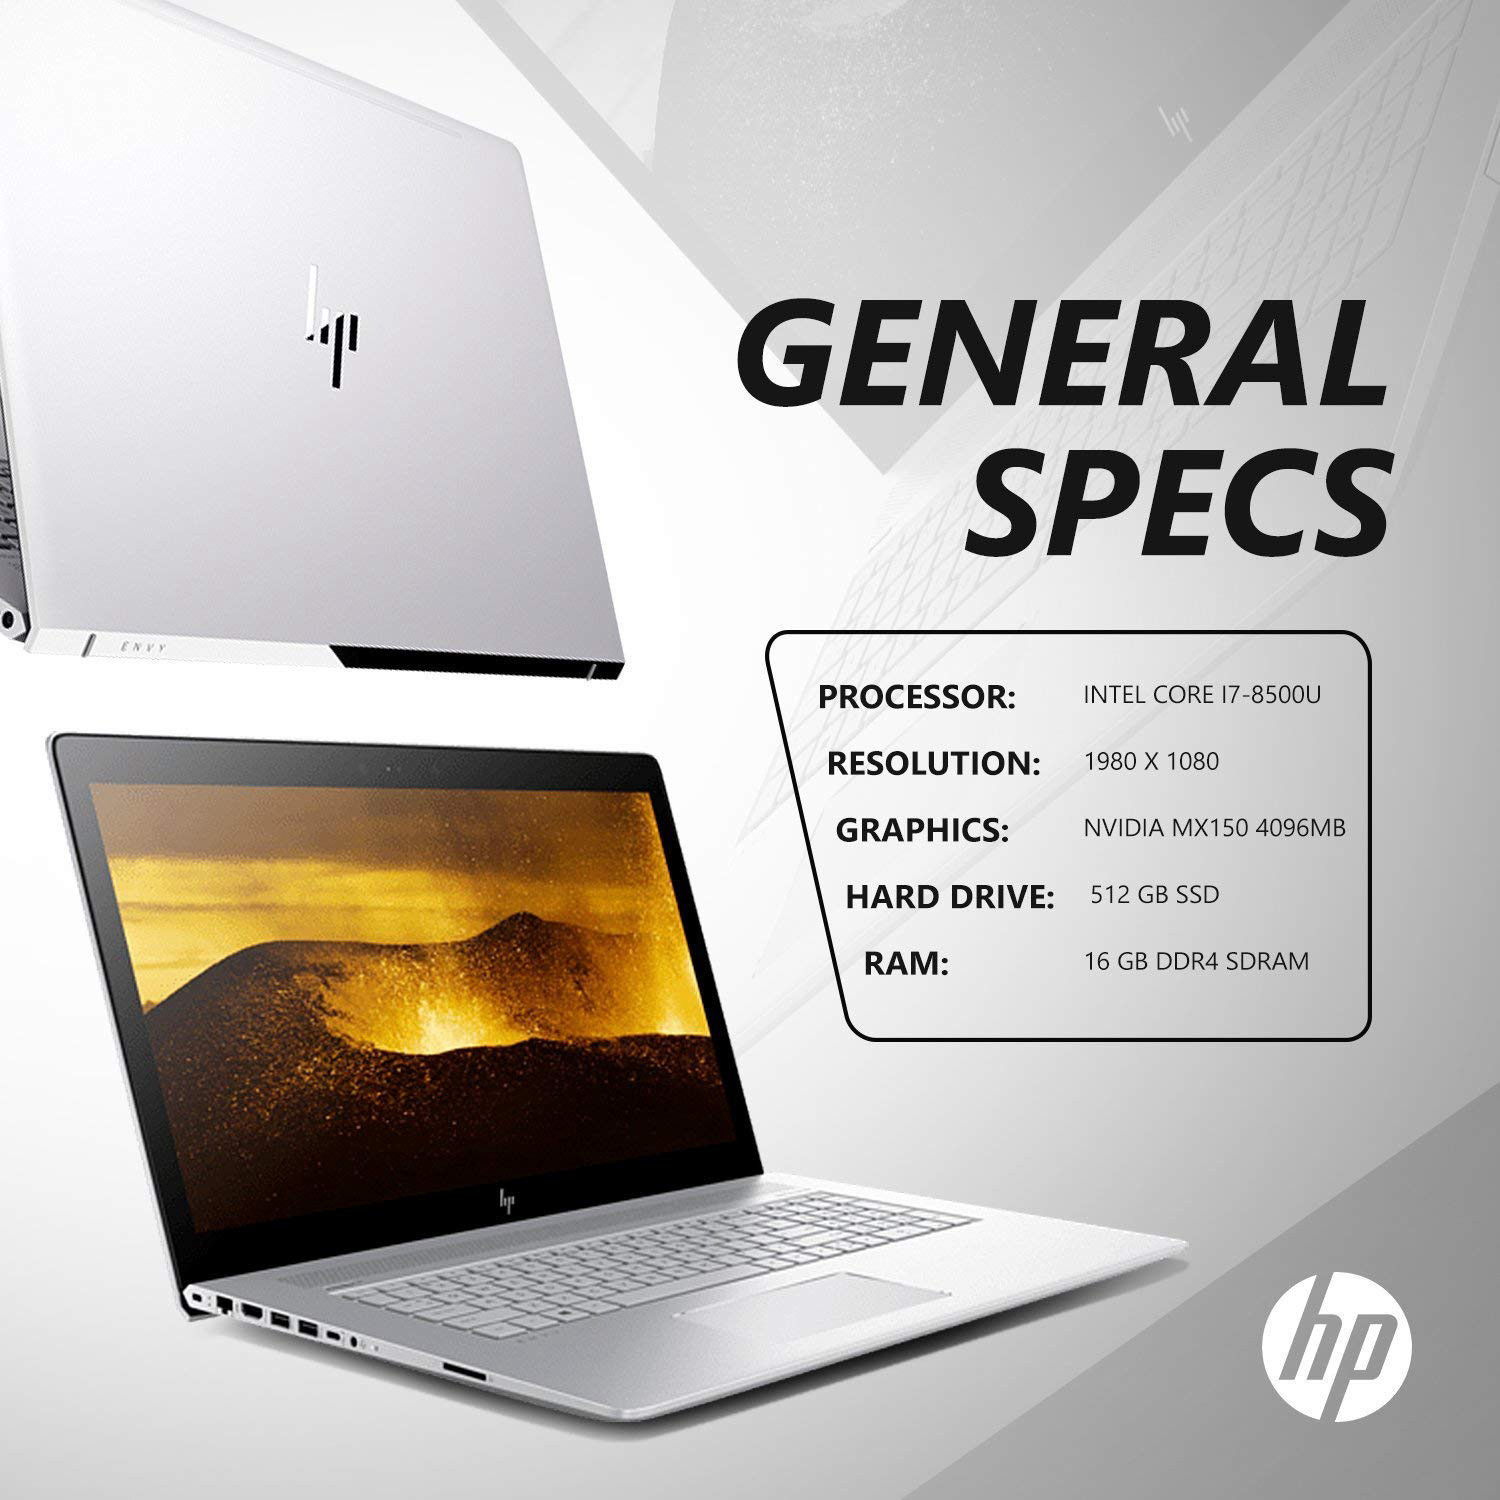 HP Envy 17T Touch Intel Core i7-8550U Quad Core, 512GB SSD, 16GB RAM, Win 10 Pro HP Installed, 17.3 FHD touch, Nvidia 4GB DDR5,B&O speakers, Mcafee 3 Years Internet Security, WideVision HD Cam(not IR)